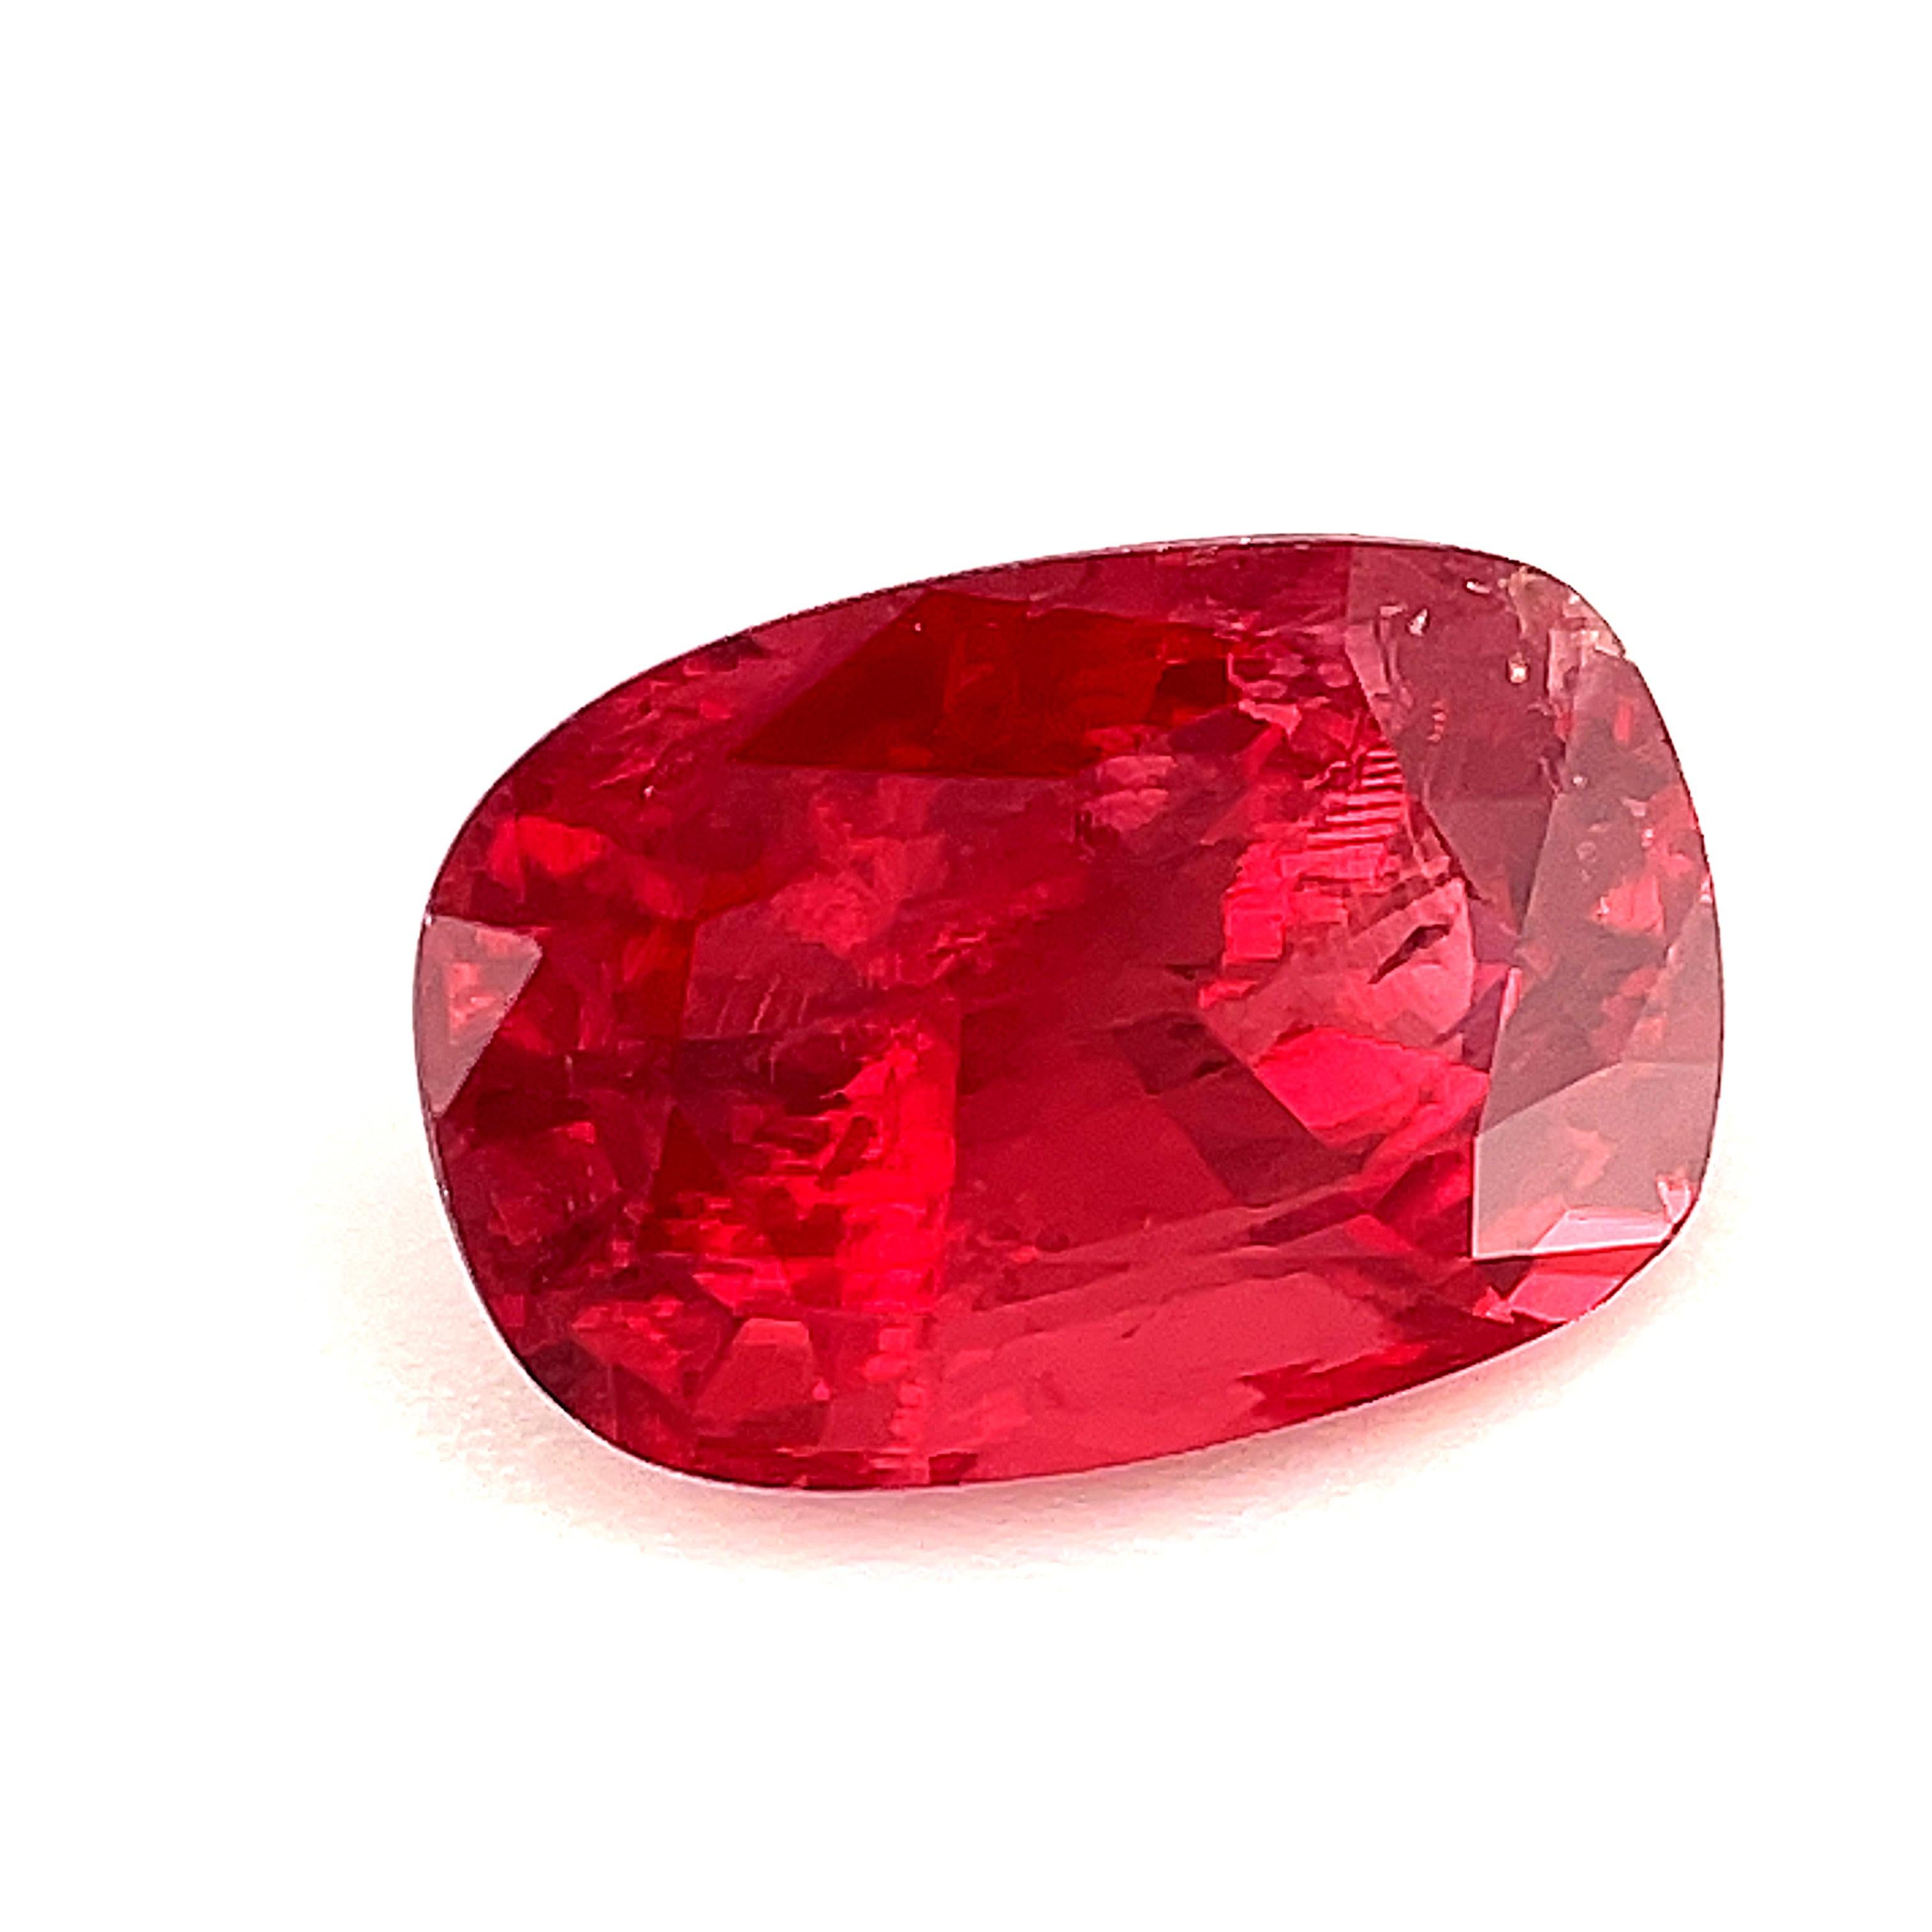 This lovely red spinel is the color of the finest ruby at a fraction of the price! Spinel is a prized gemstone in its own right, and for good reason. It comes in a rainbow of striking colors and is blessed with remarkable brilliance and sparkle!